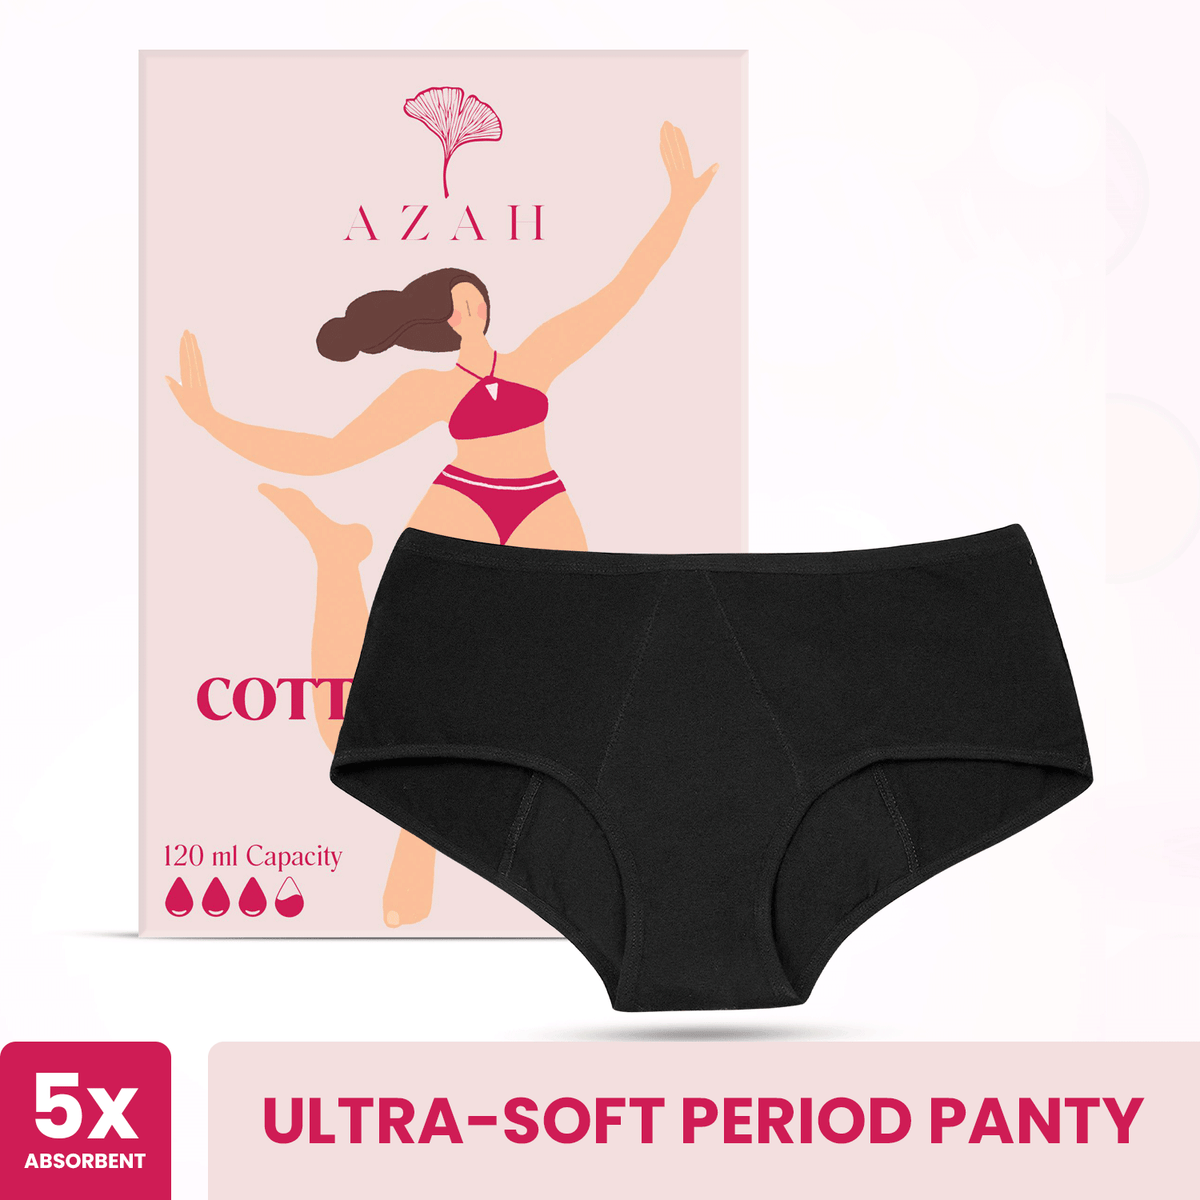 Reusable Period Underwear on Red Background. Absorbent and